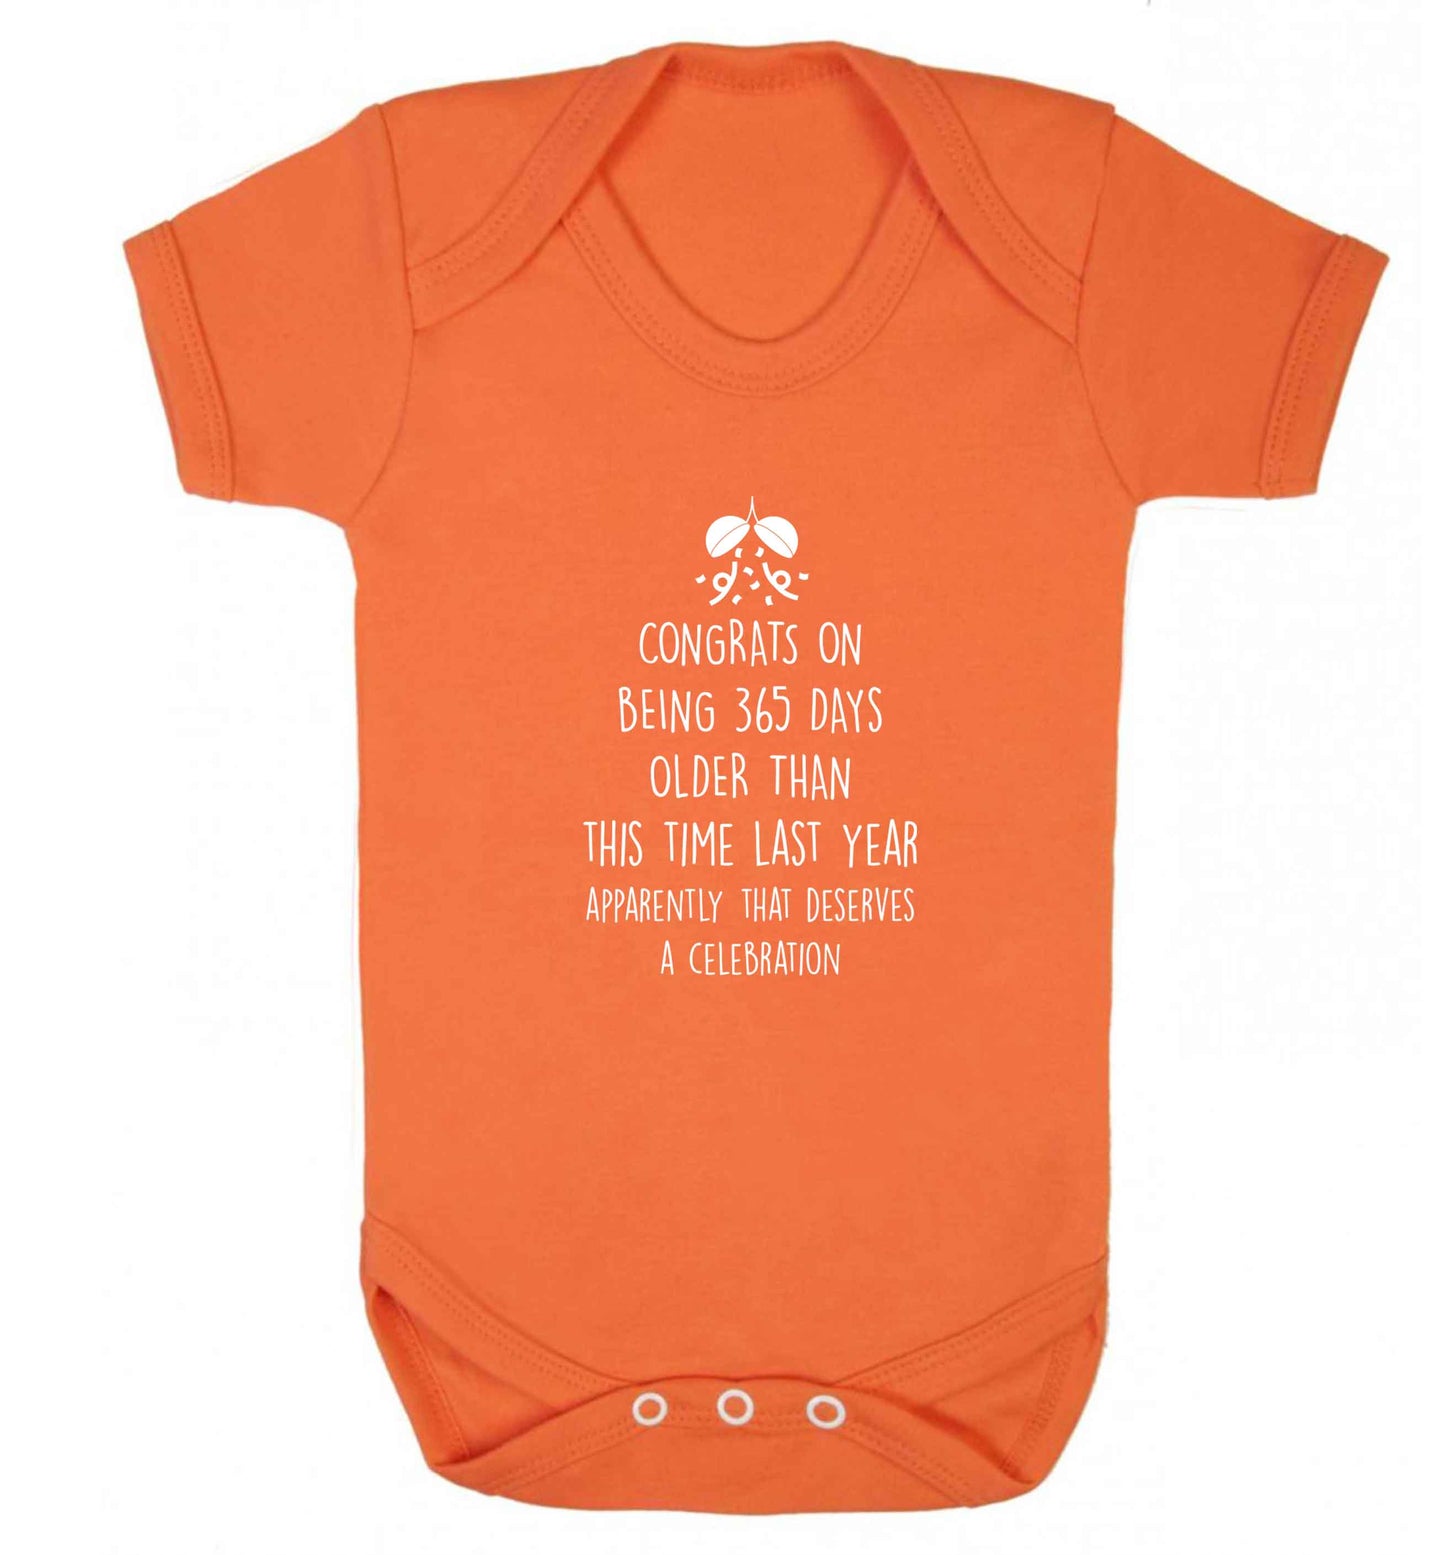 Congrats on being 365 days older than you were this time last year apparently that deserves a celebration baby vest orange 18-24 months